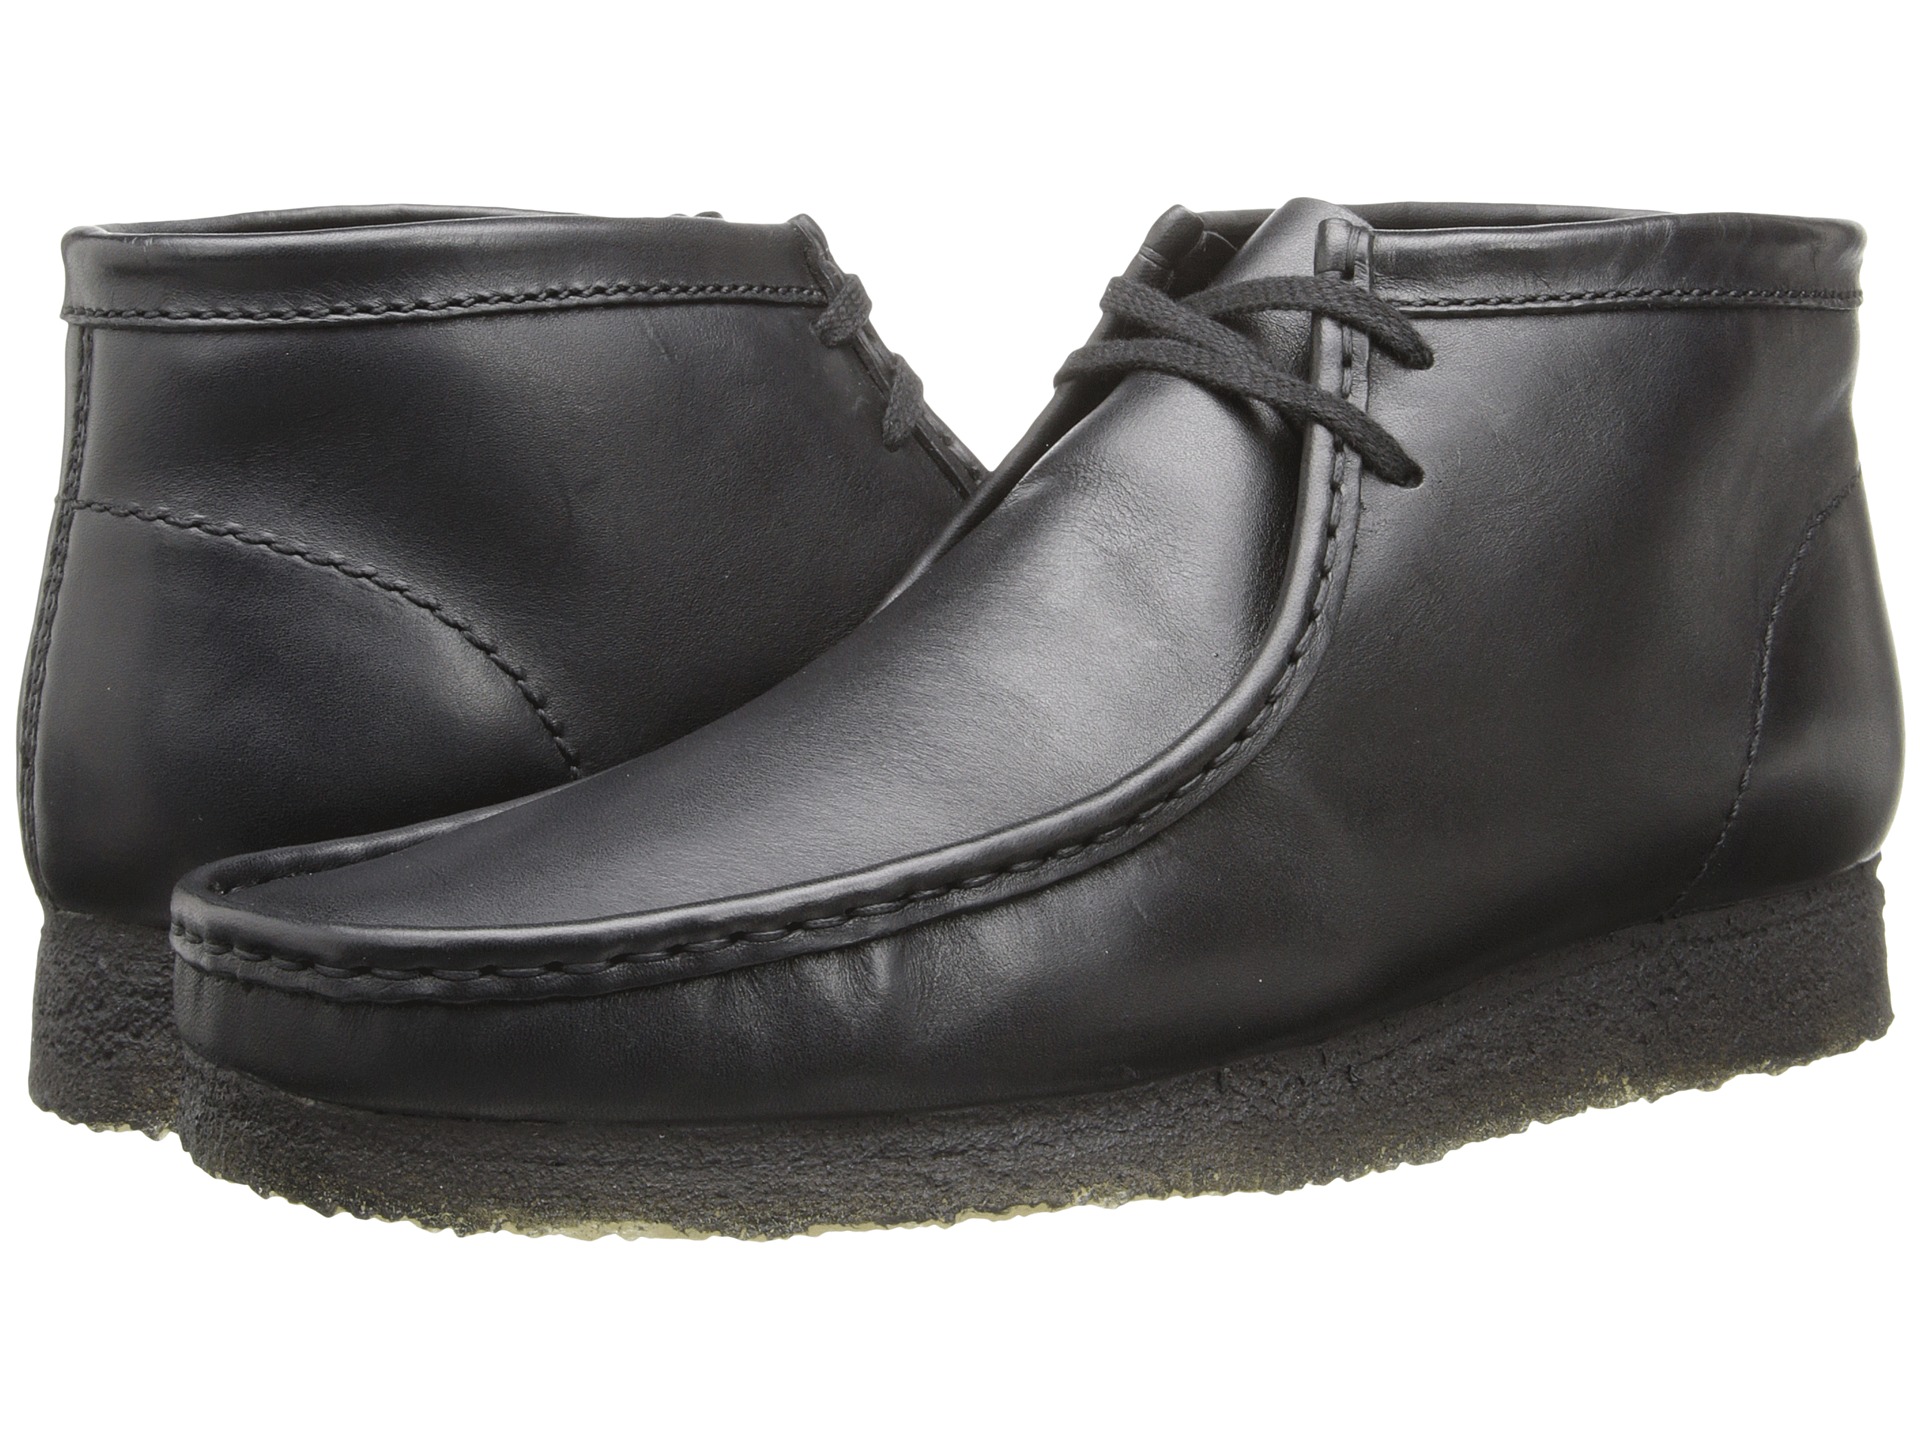 Clarks Wallabee Boot at Zappos.com